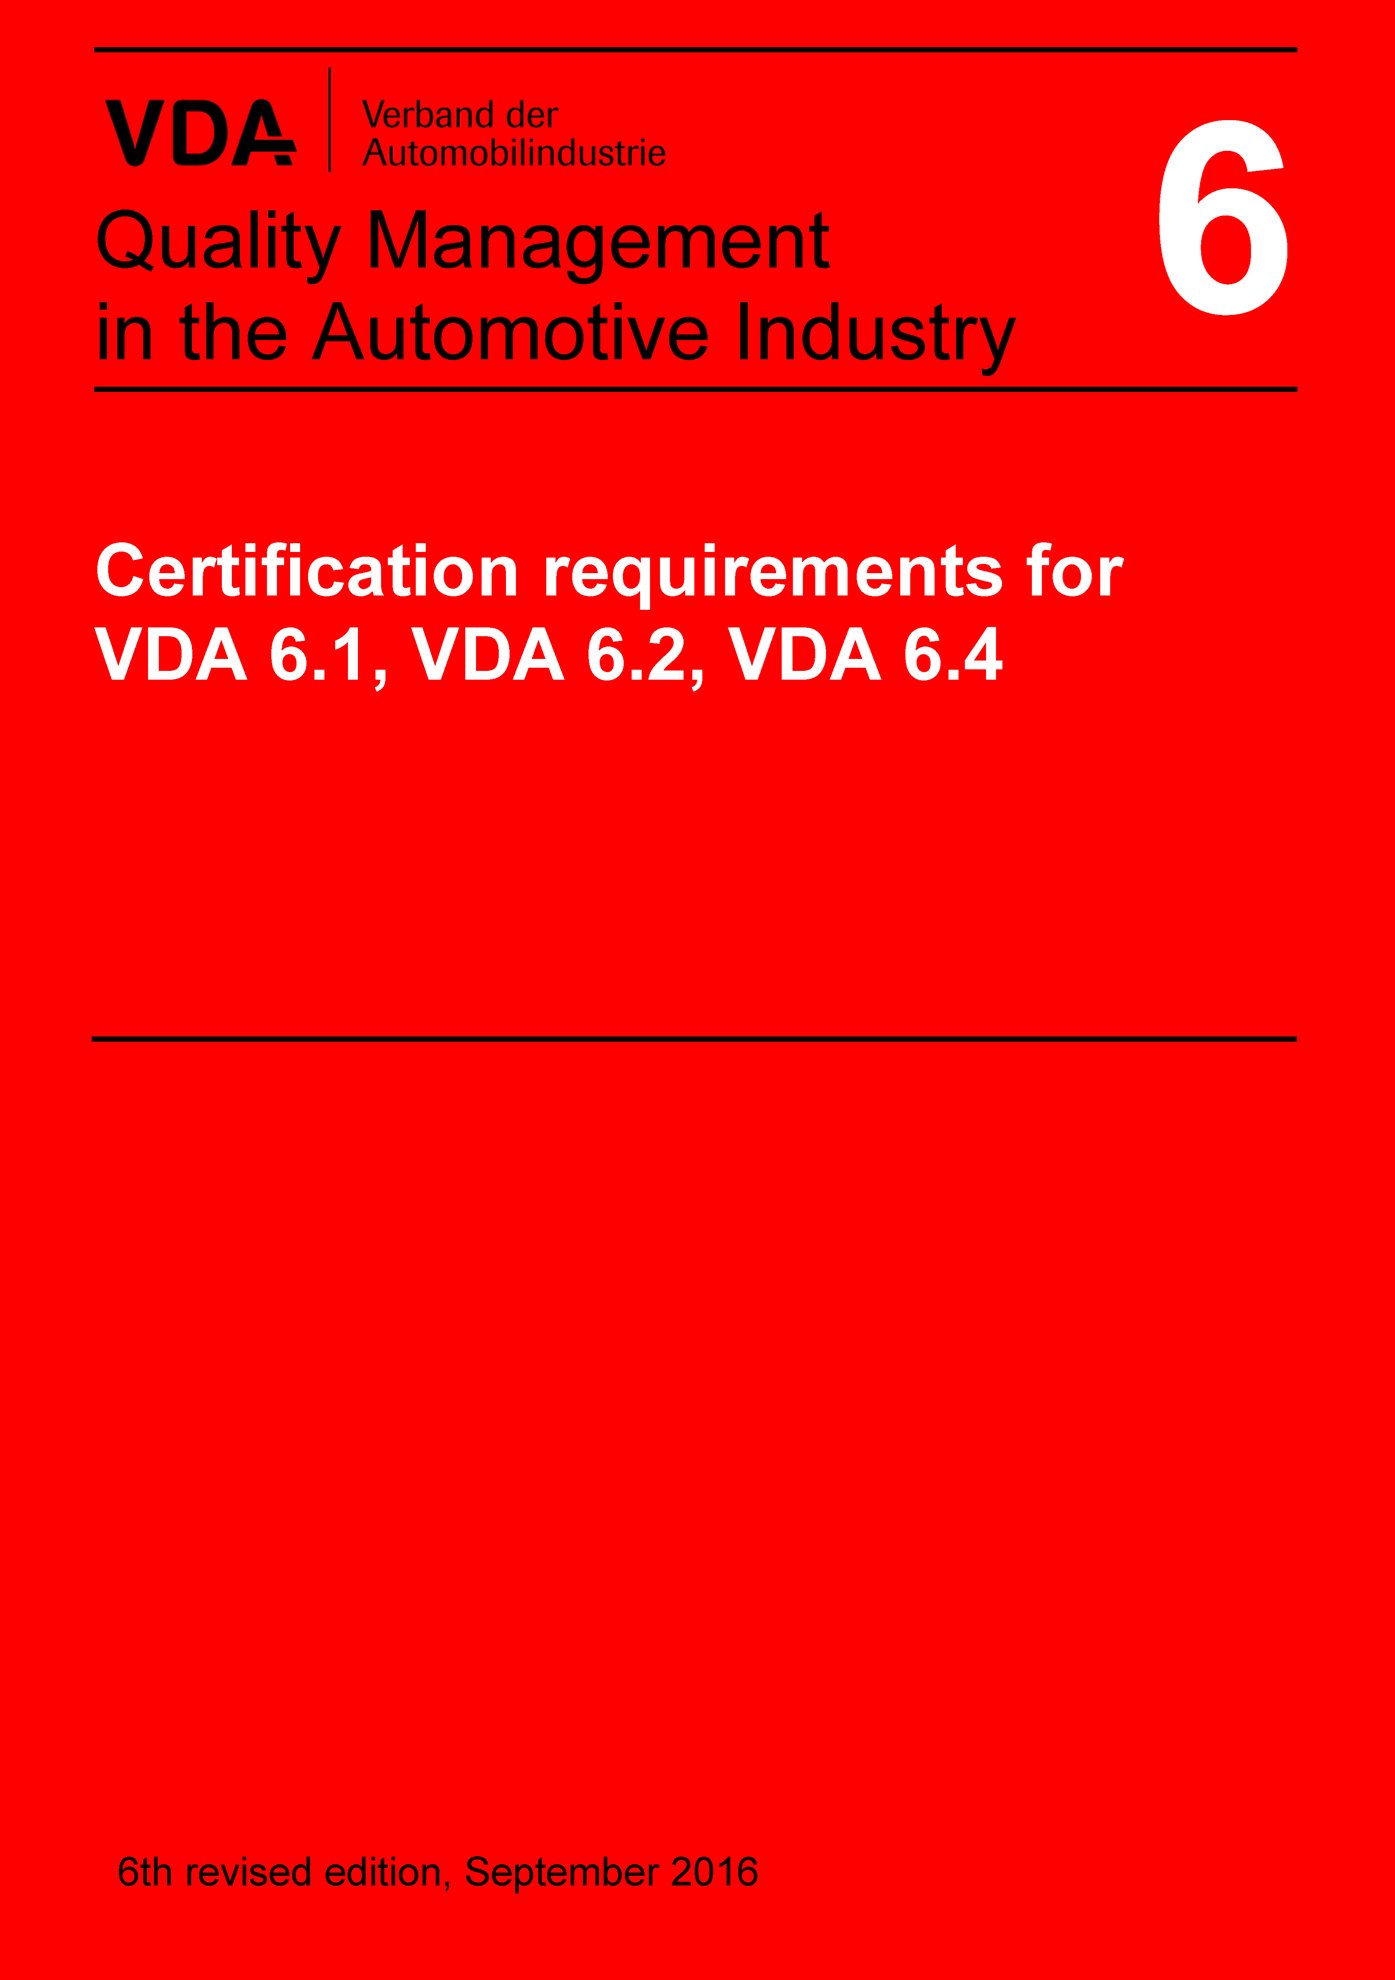 Publikácie  VDA Volume 6 Certification Requirements for VDA 6.1, VDA 6.2 and VDA 6.4
 6th revised edition, September 2016
 (English edition published 2017/09) 1.9.2016 náhľad